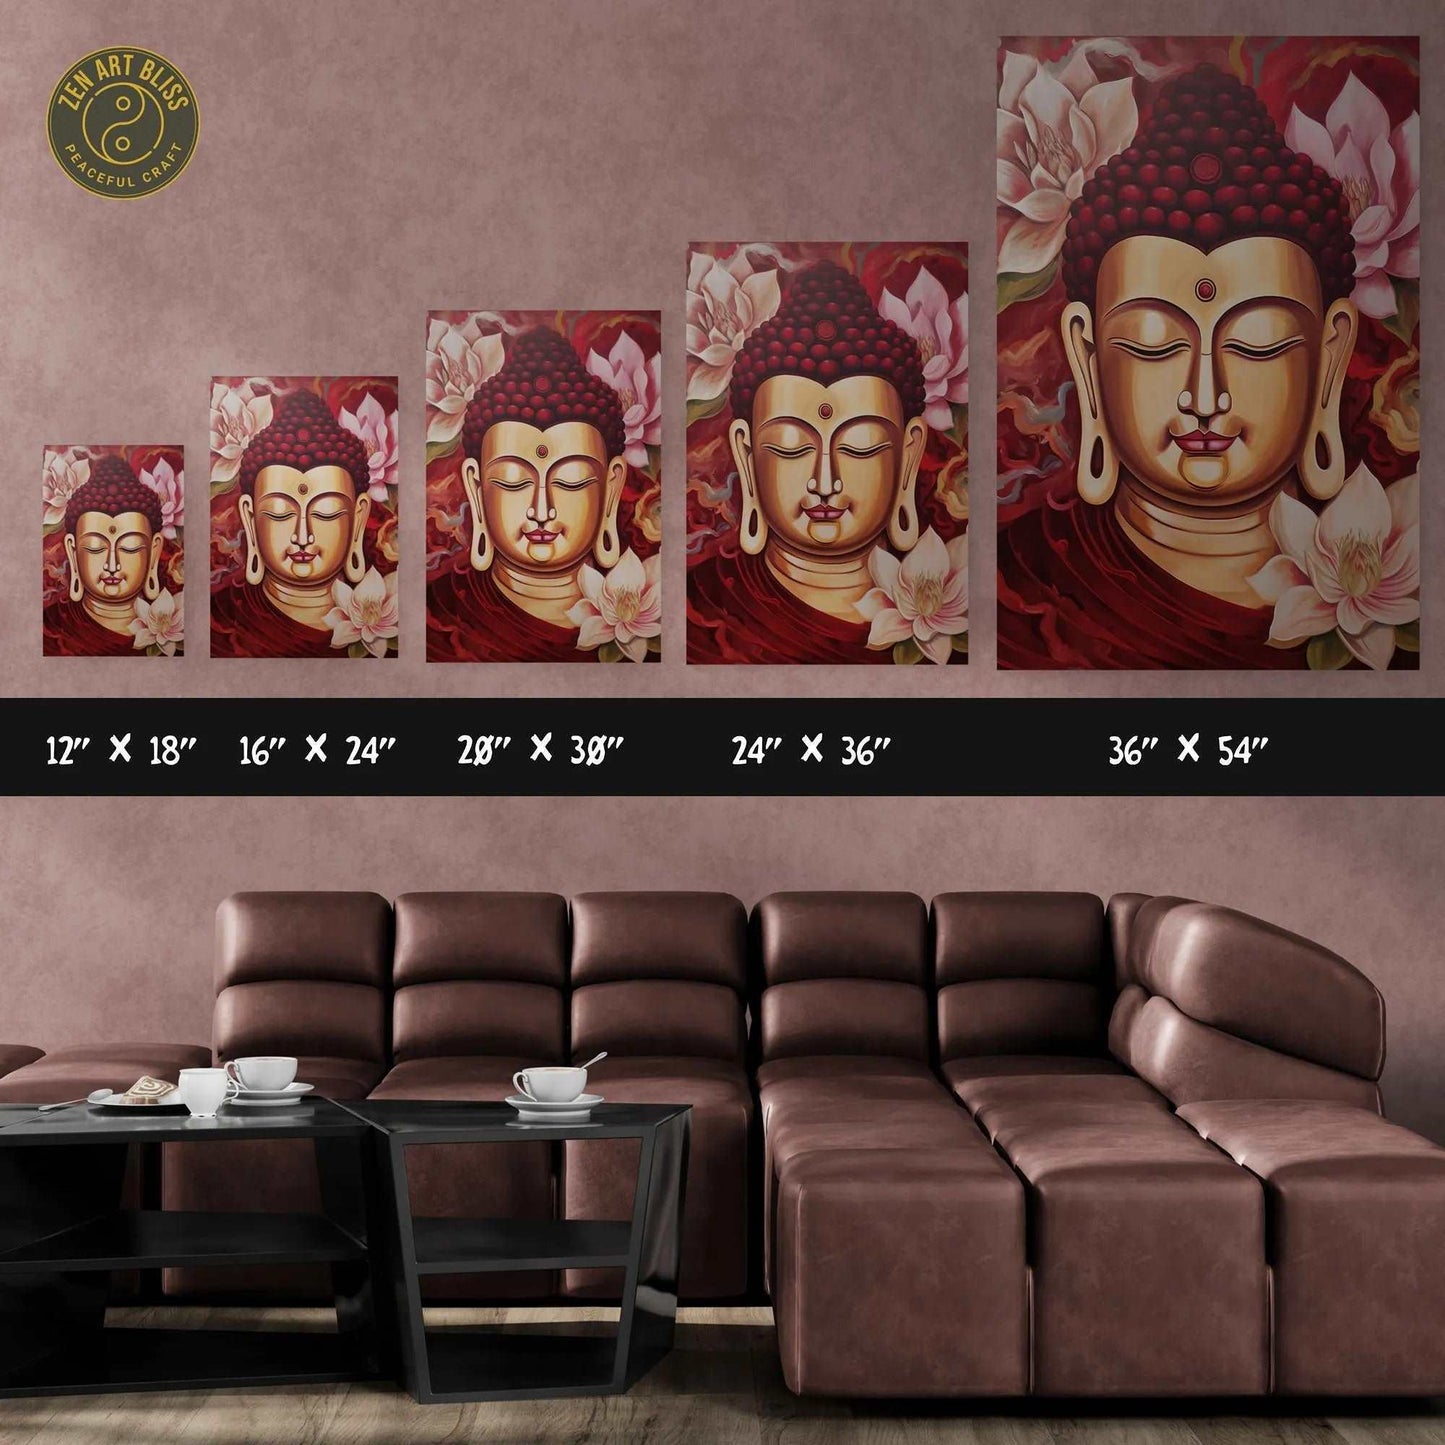 ZenArtBliss.com's Buddha Poster Tennessee showcasing a black Buddha Head with pink lotuses, blending tradition with a modern twist on premium matte paper.